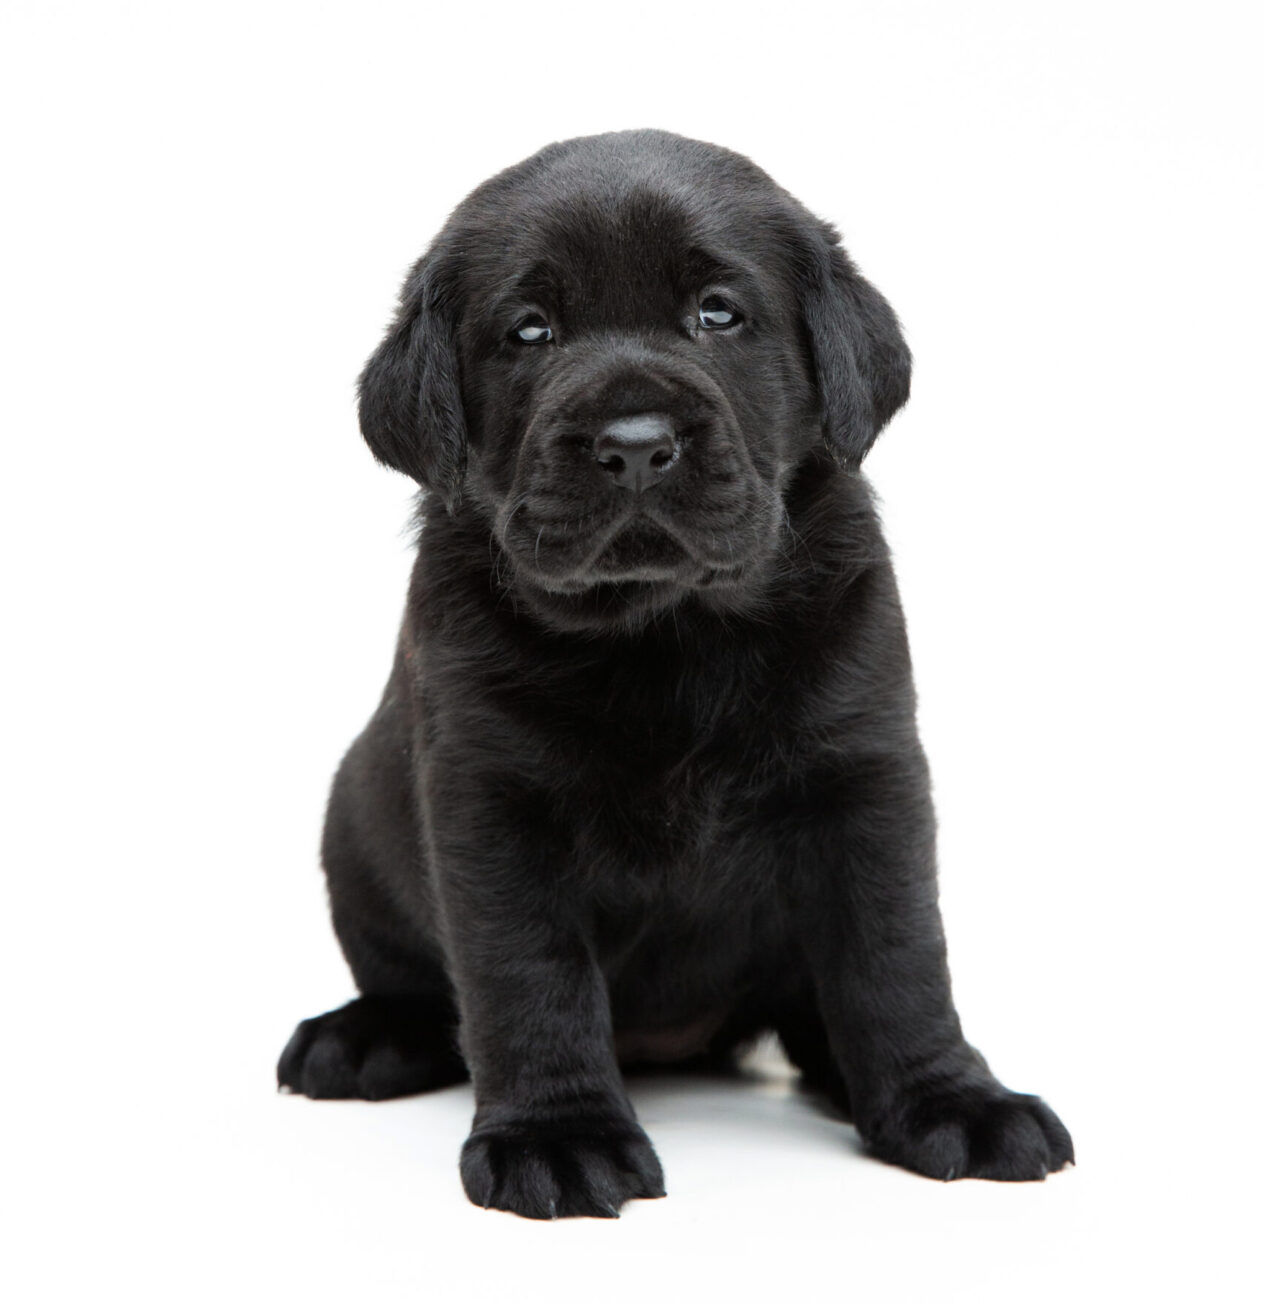 A 4 week old black Labrador puppy sitting up on a white background.